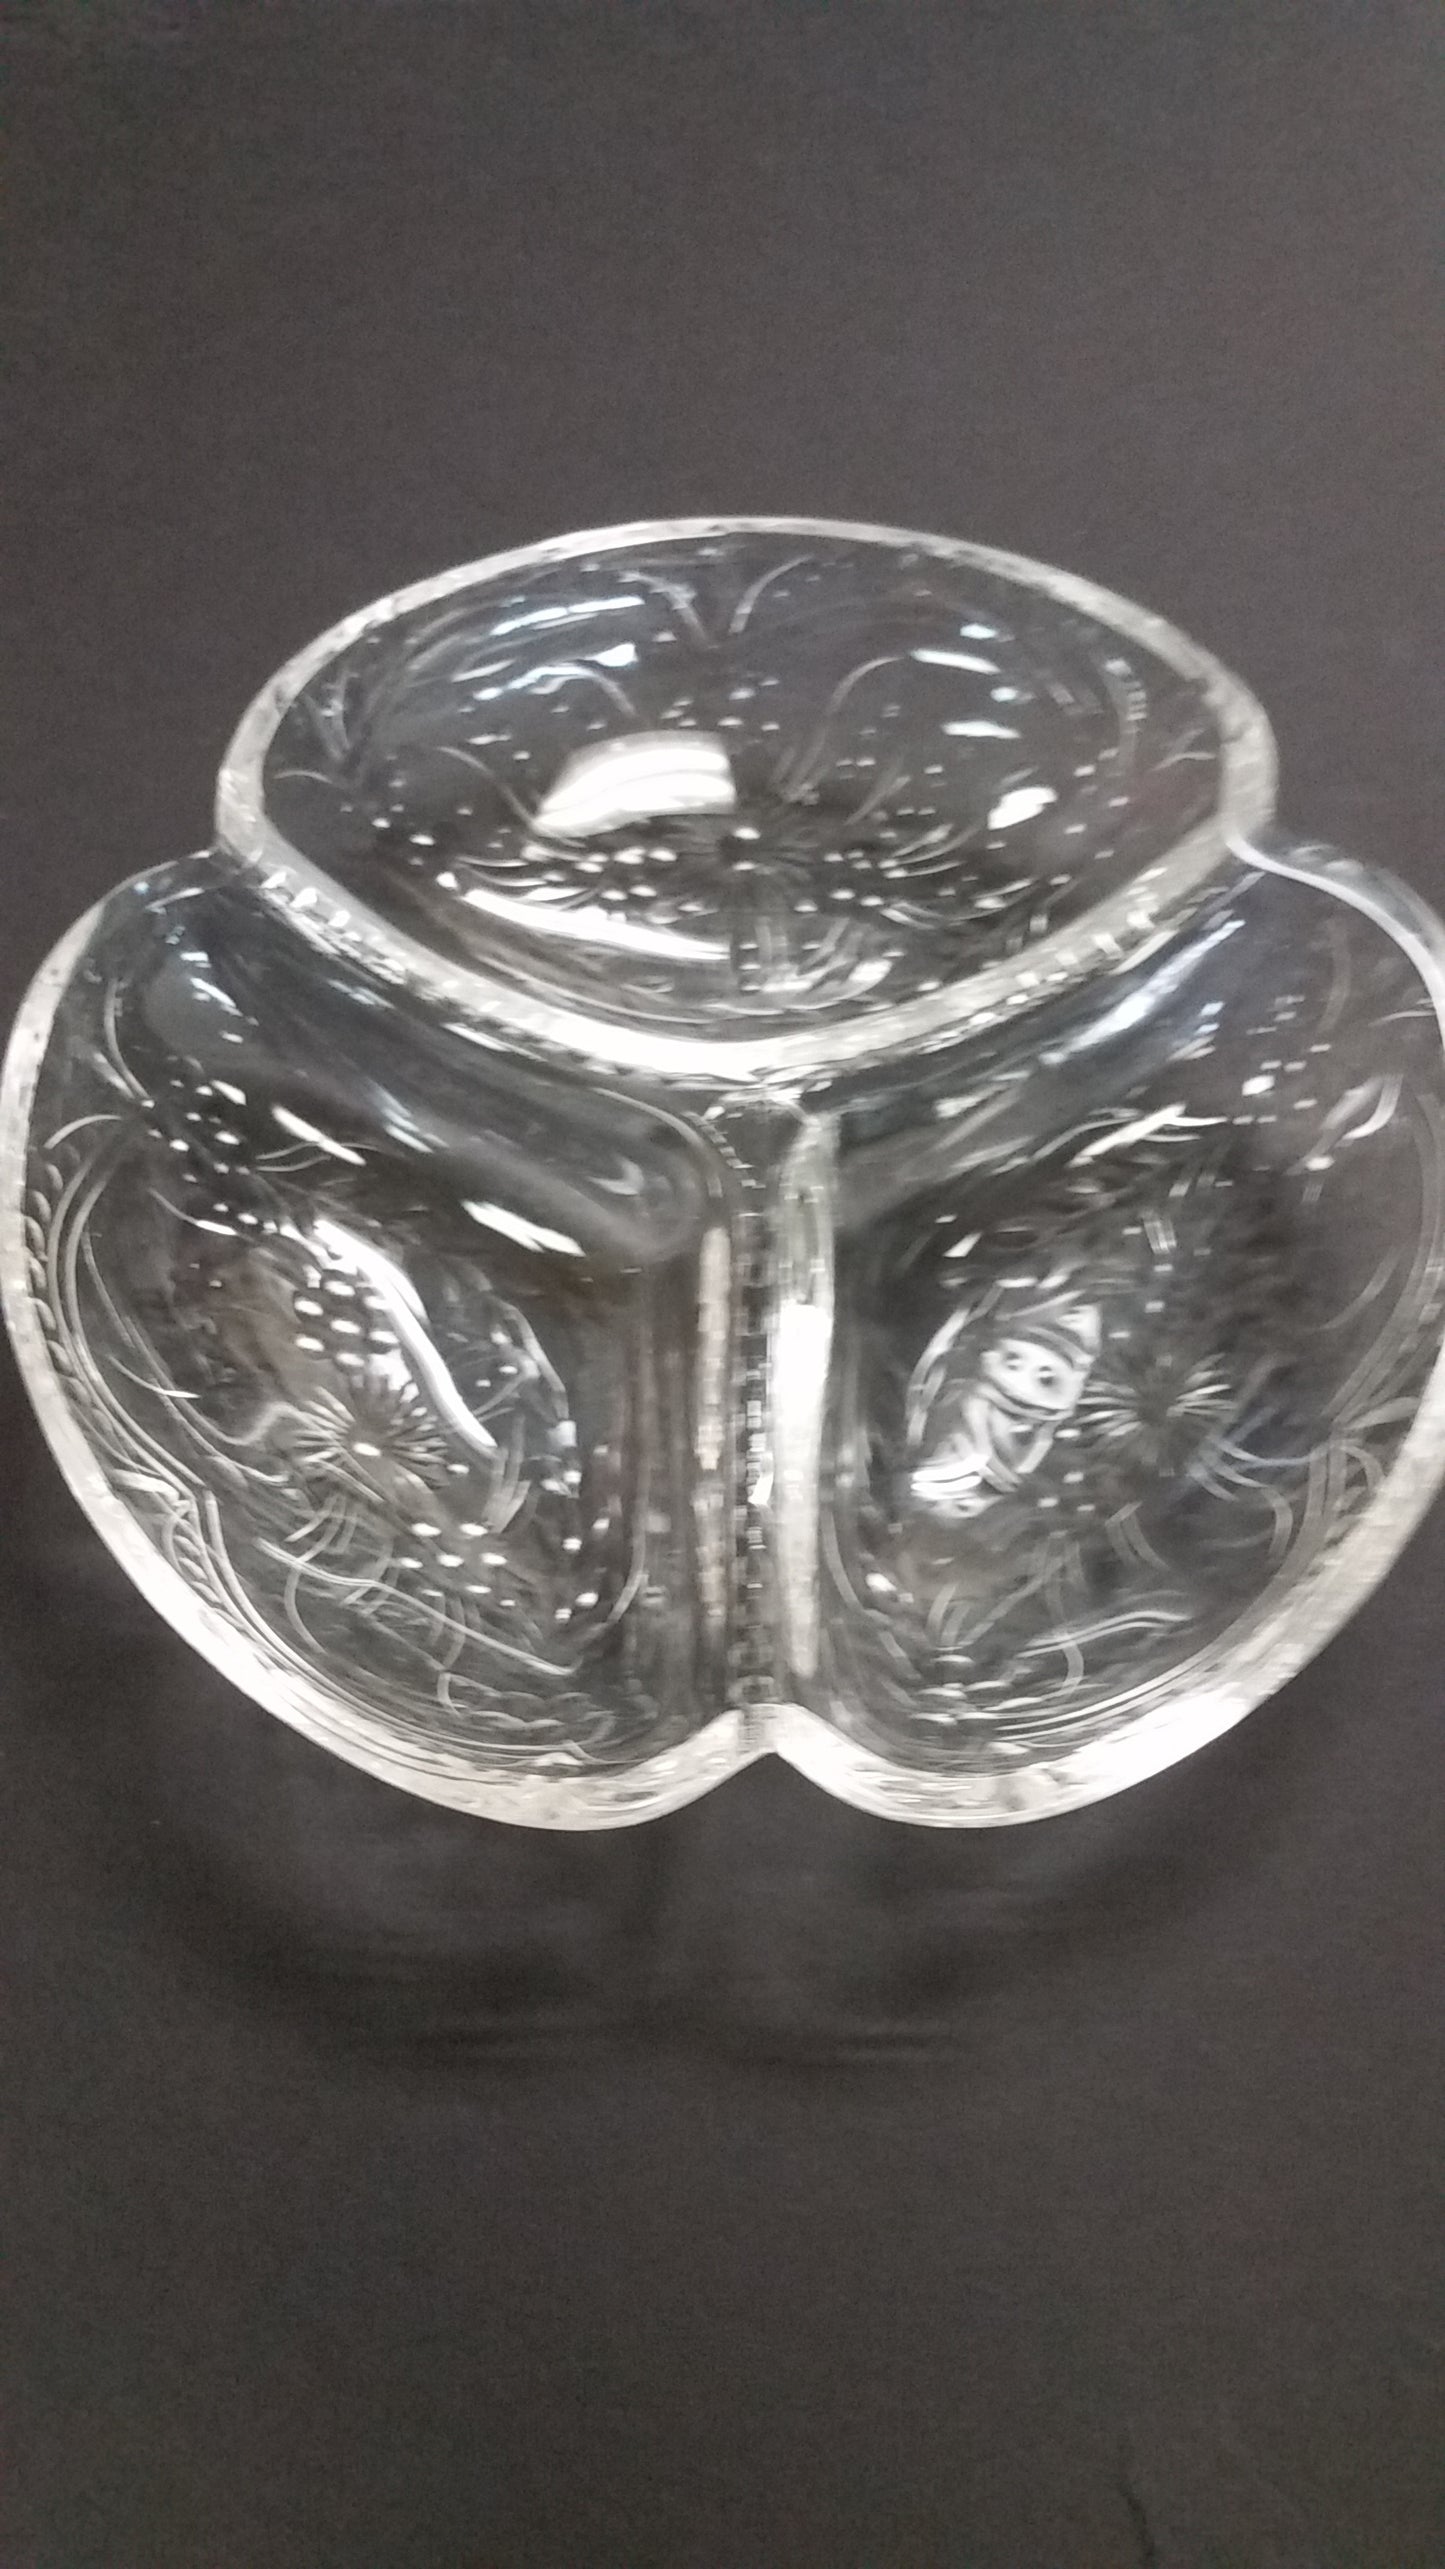 Hand cut crystal 3 section dish - O'Rourke crystal awards & gifts abp cut glass